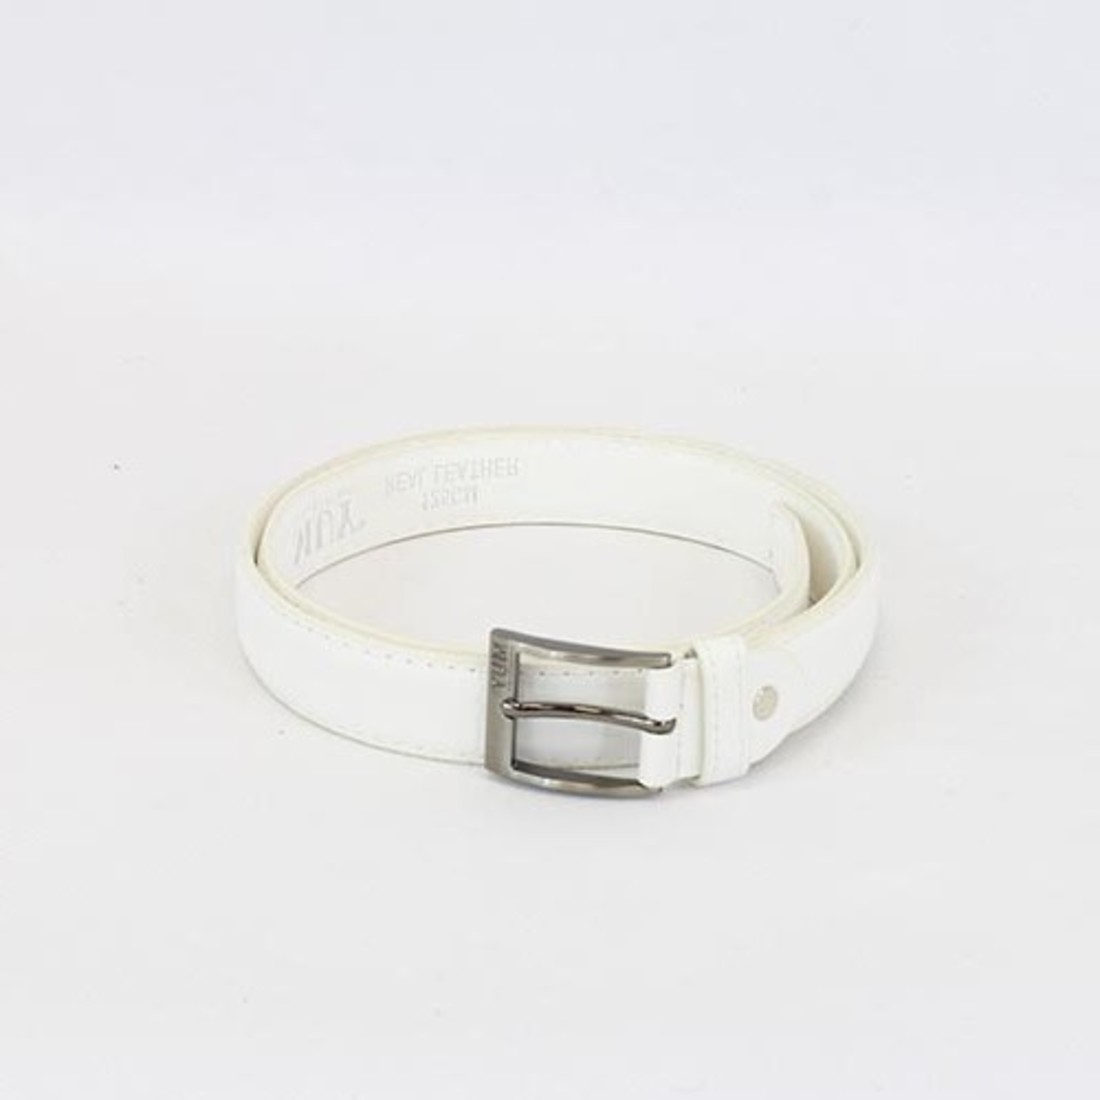 Plain with square silver buckle